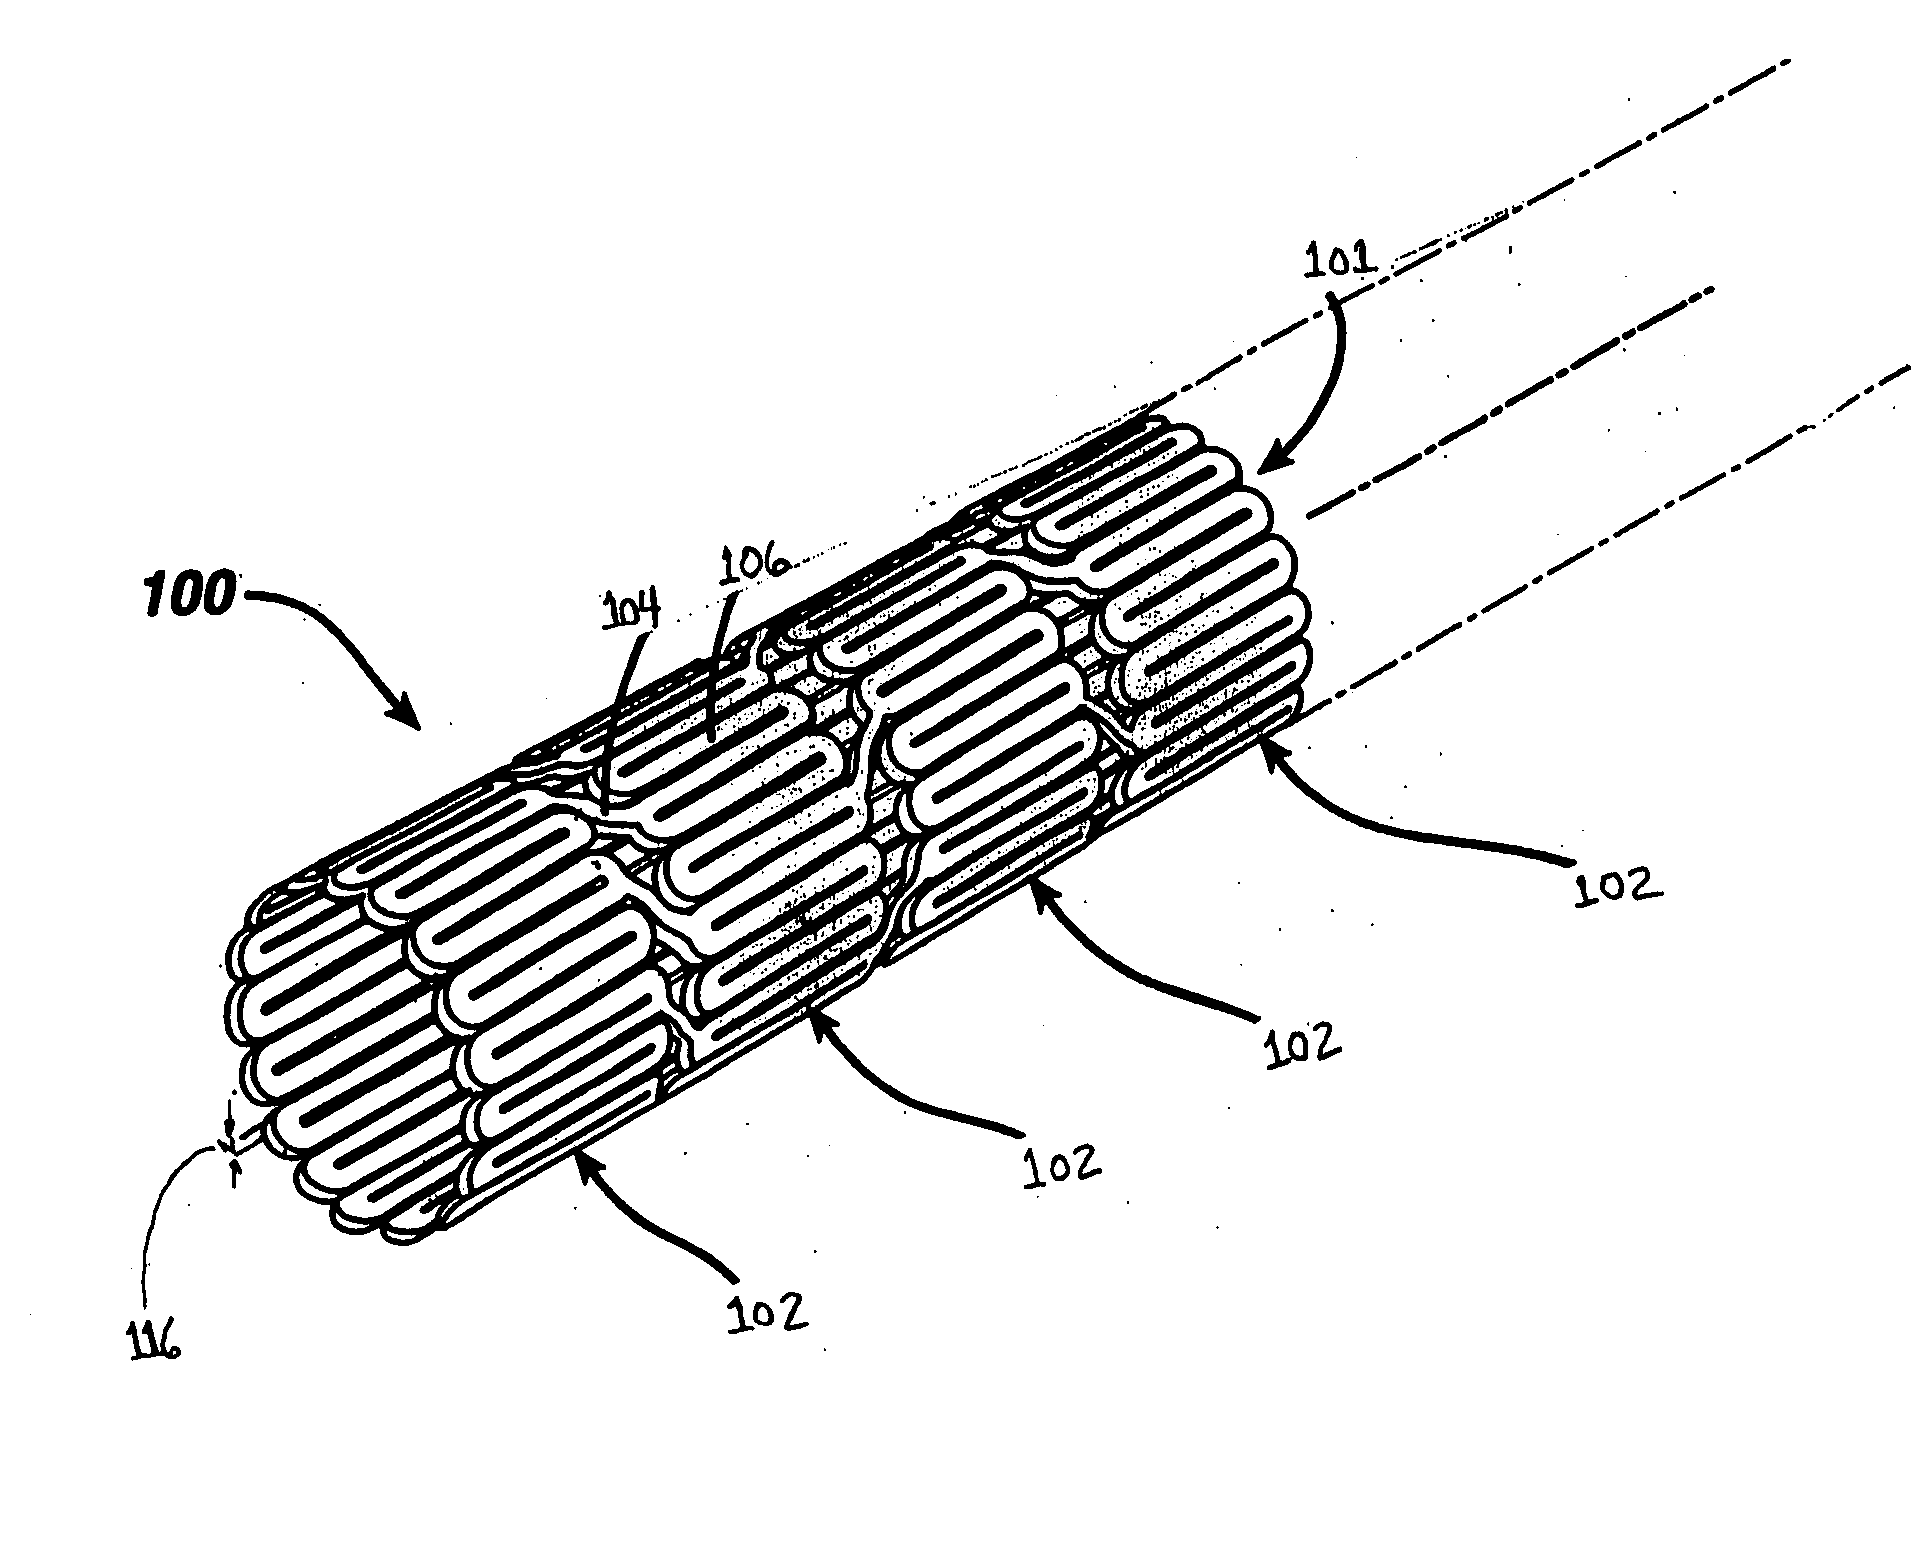 Method and apparatus for making polymeric drug delivery devices having differing morphological structures